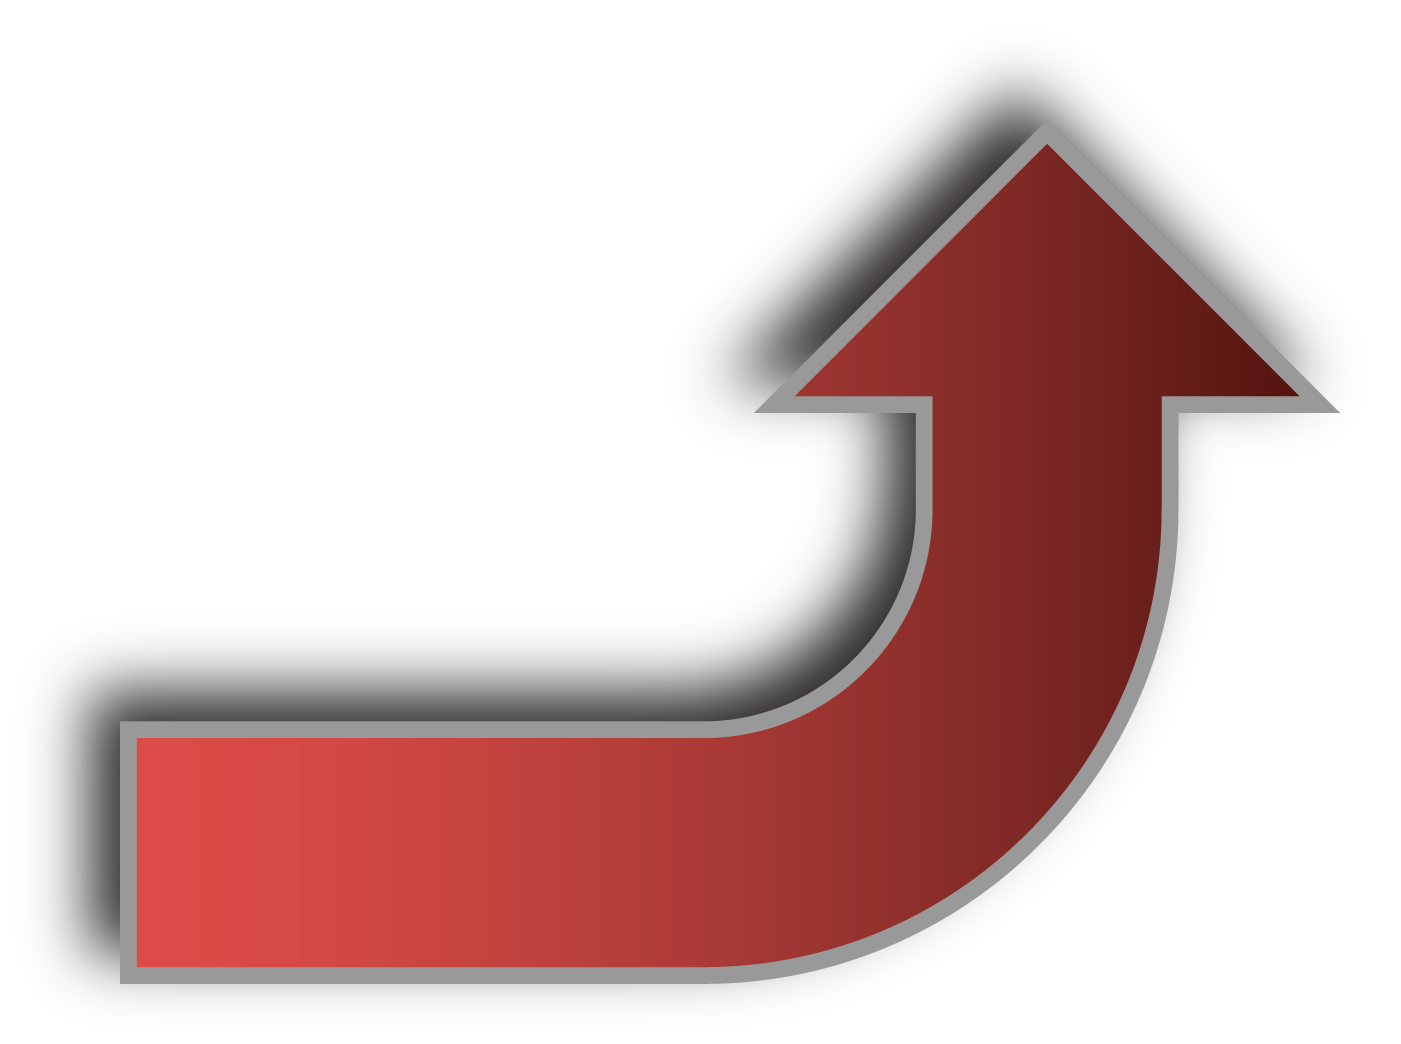 Upward Curved Arrow PNG Image